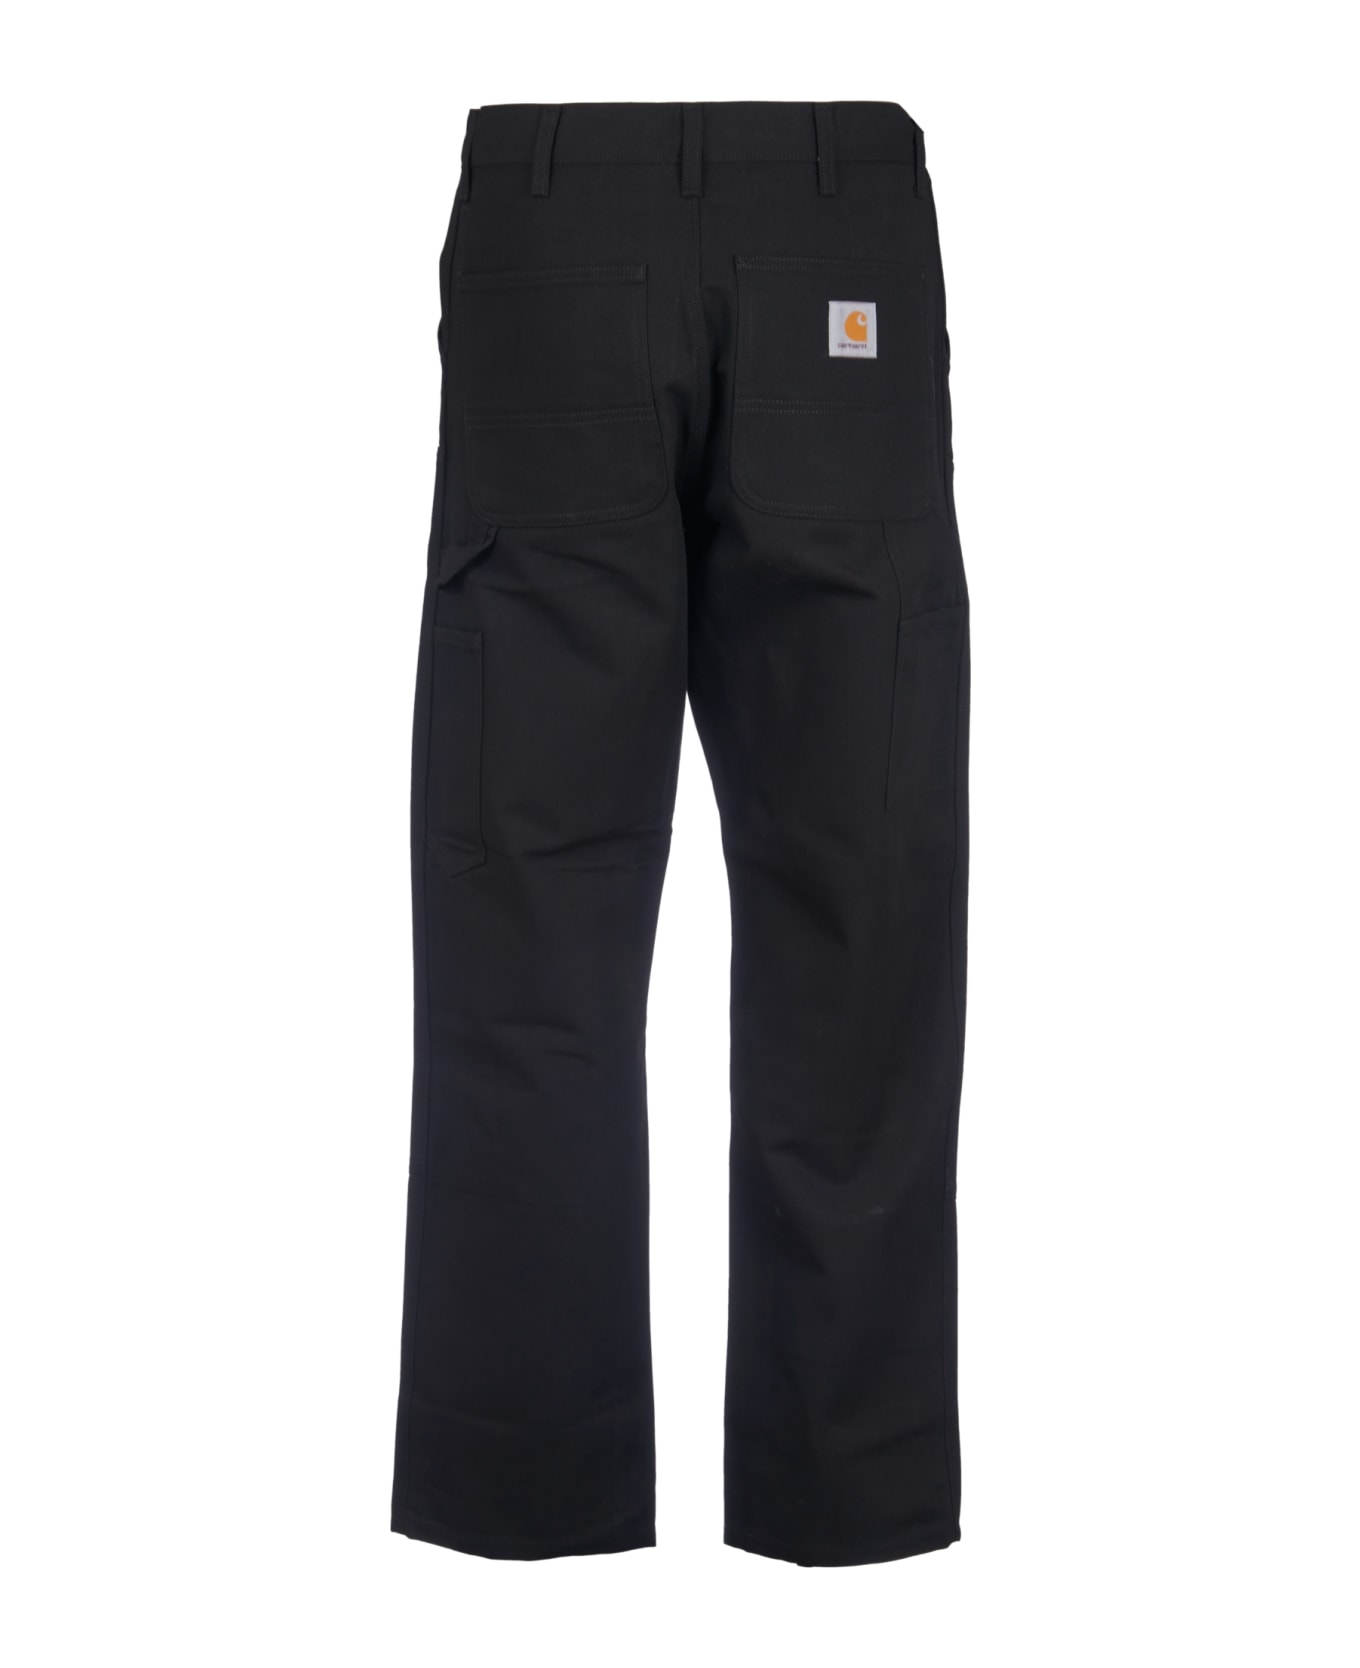 Carhartt Straight Buttoned Trousers - Black